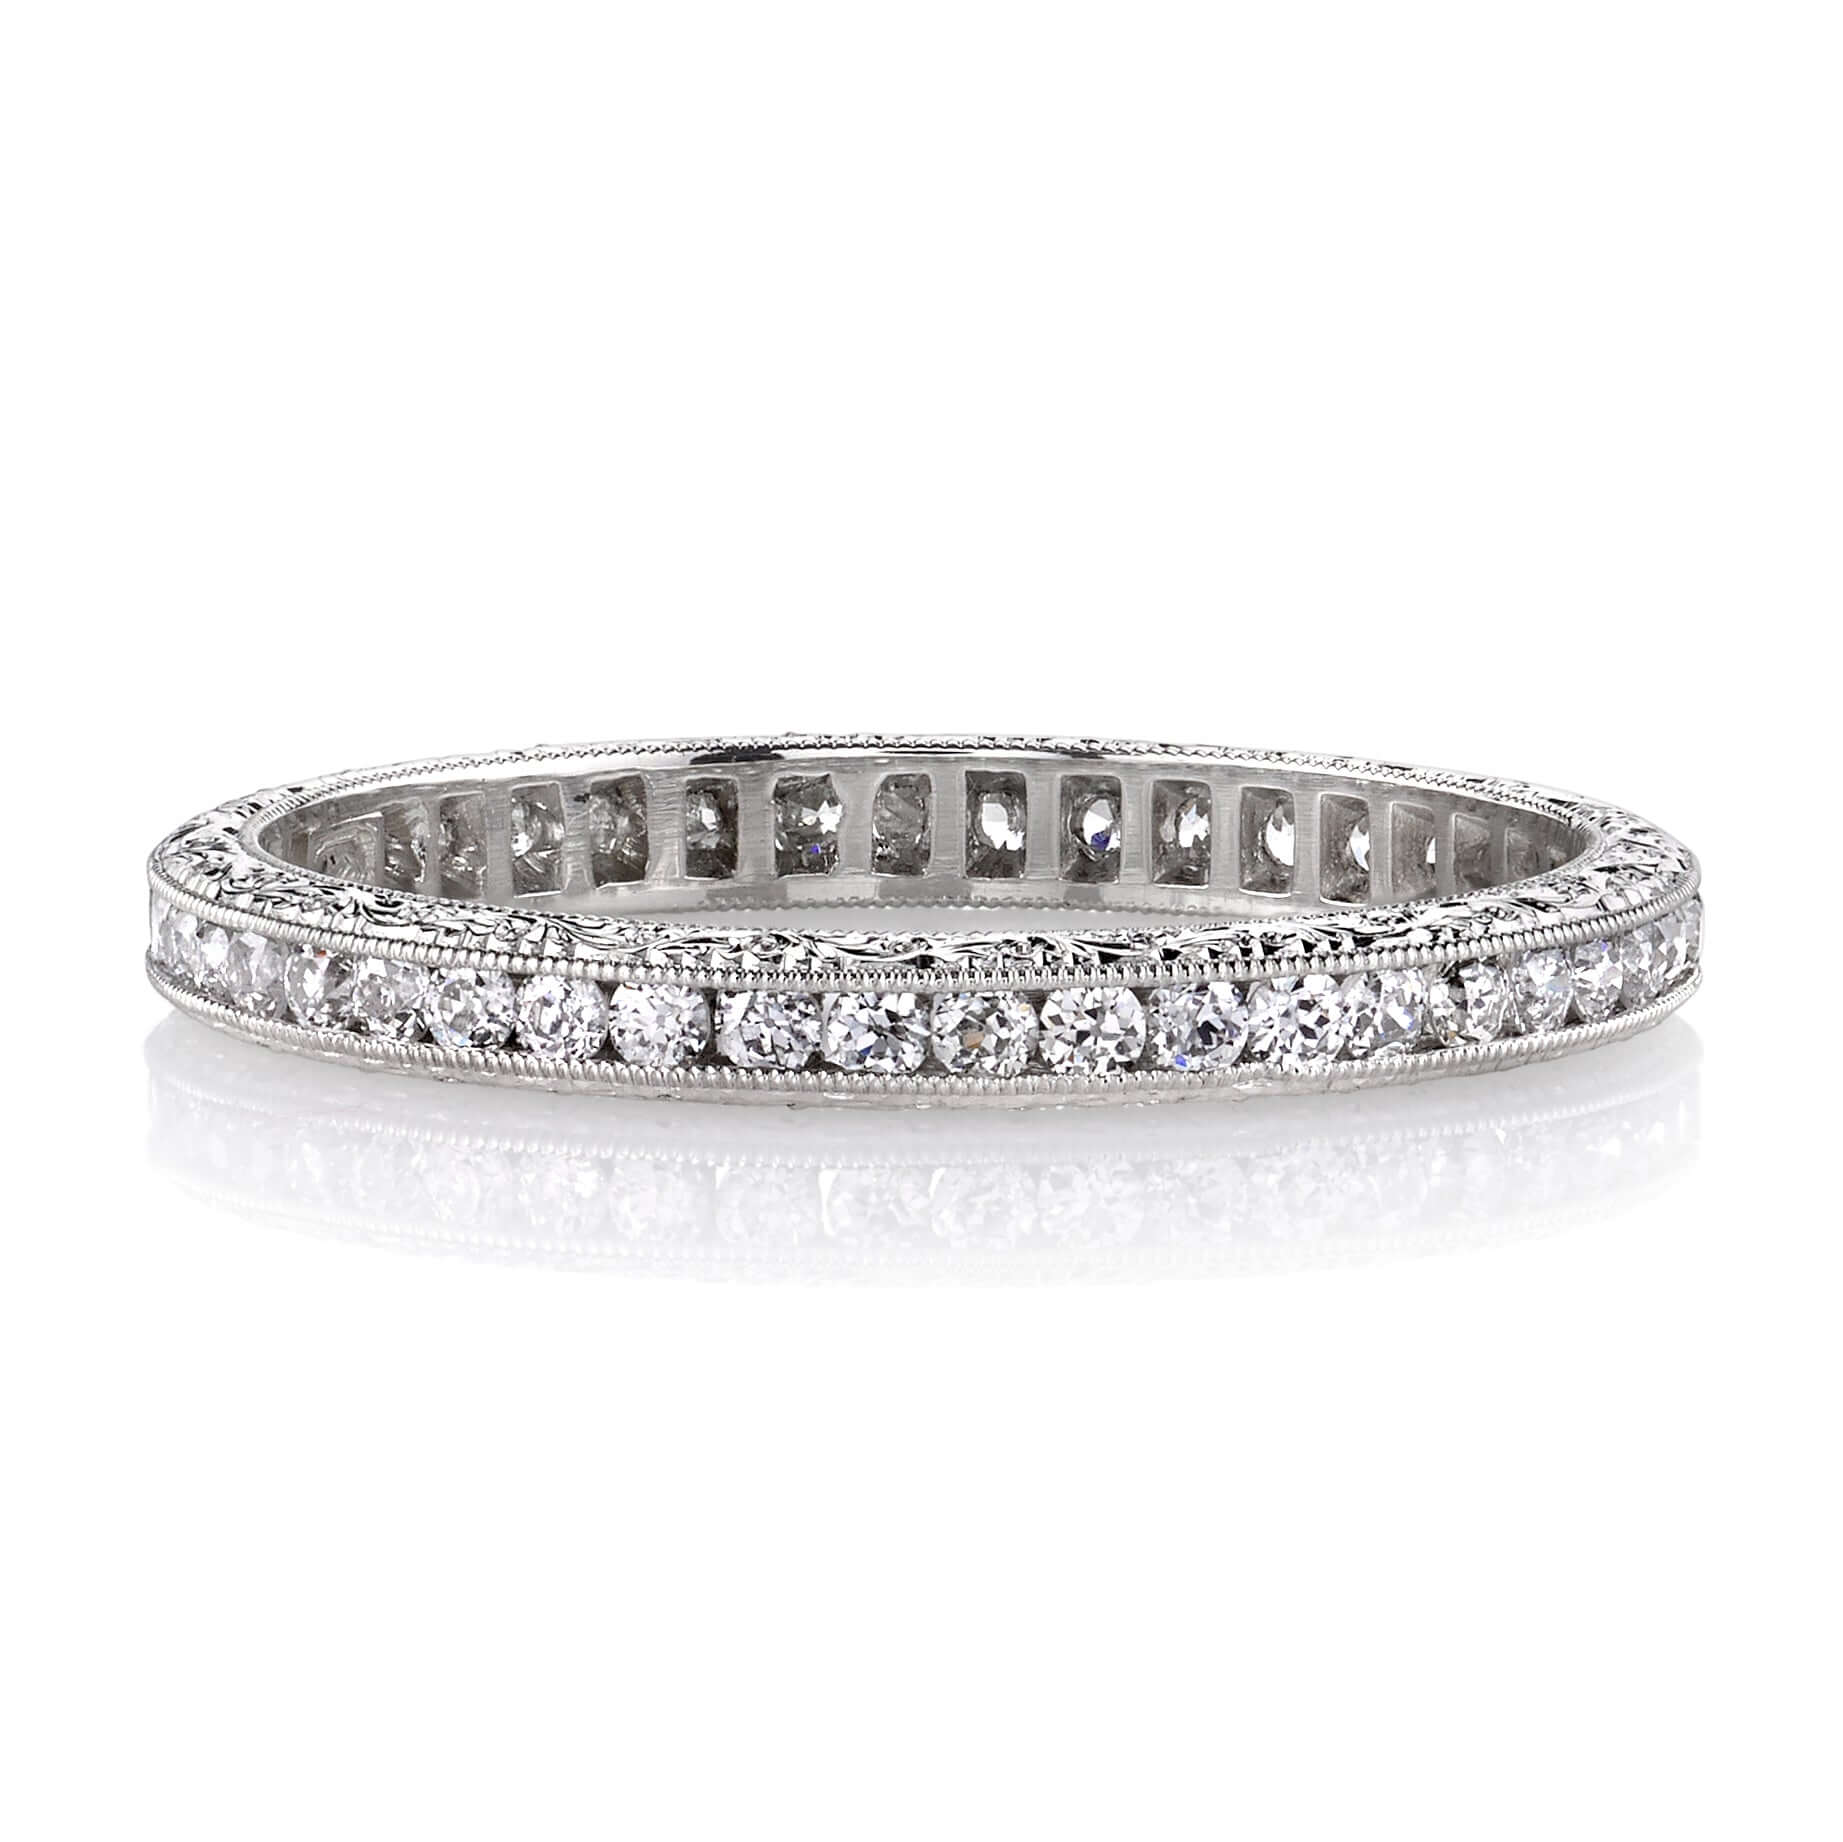 SINGLE STONE MADISON BAND | Approximately 0.40ctw old European cut diamonds channel set in a handcrafted eternity band. Available with polished or engraved sidewalls. Approximate band width 2.1mm.